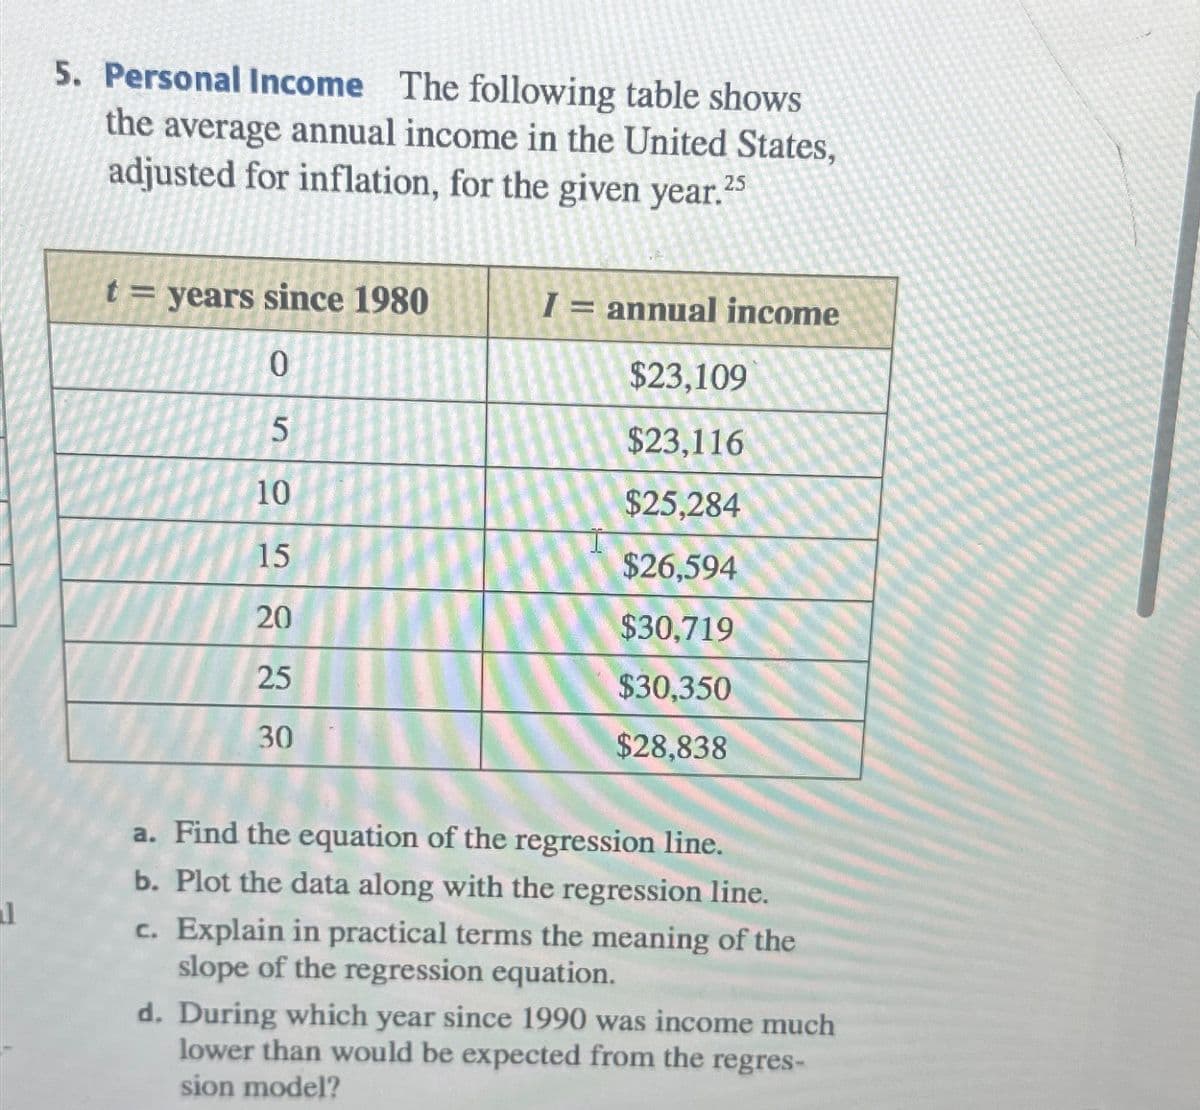 5. Personal Income The following table shows
the average annual income in the United States,
adjusted for inflation, for the given year.
25
t=years since 1980
I = annual income
0
$23,109
5
$23,116
10
$25,284
15
$26,594
20
$30,719
25
$30,350
30
$28,838
a. Find the equation of the regression line.
b. Plot the data along with the regression line.
c. Explain in practical terms the meaning of the
slope of the regression equation.
d. During which year since 1990 was income much
lower than would be expected from the regres-
sion model?